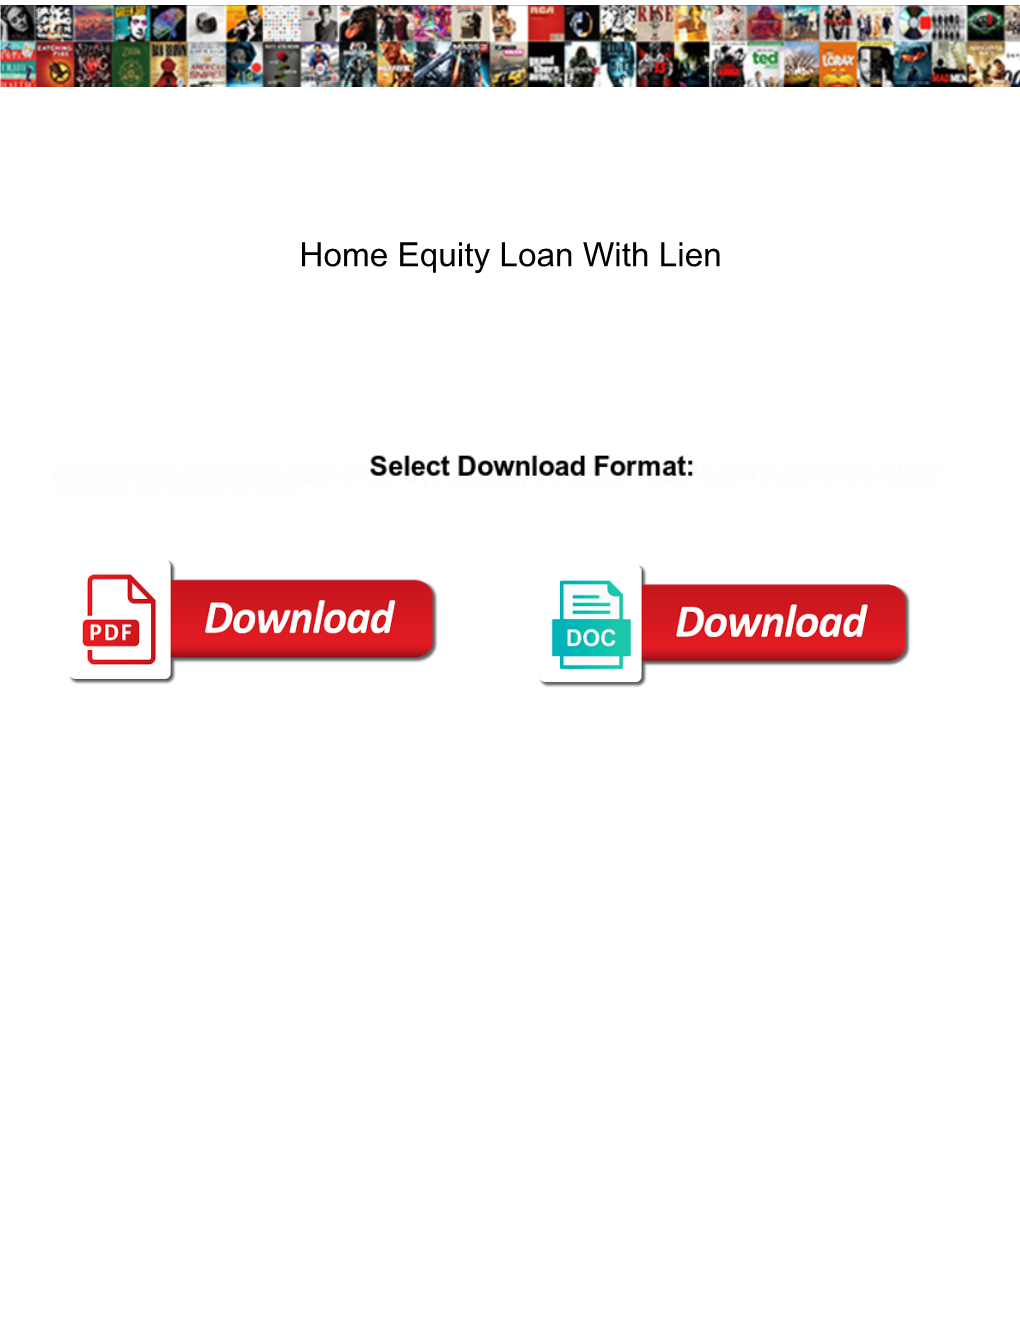 Home Equity Loan with Lien